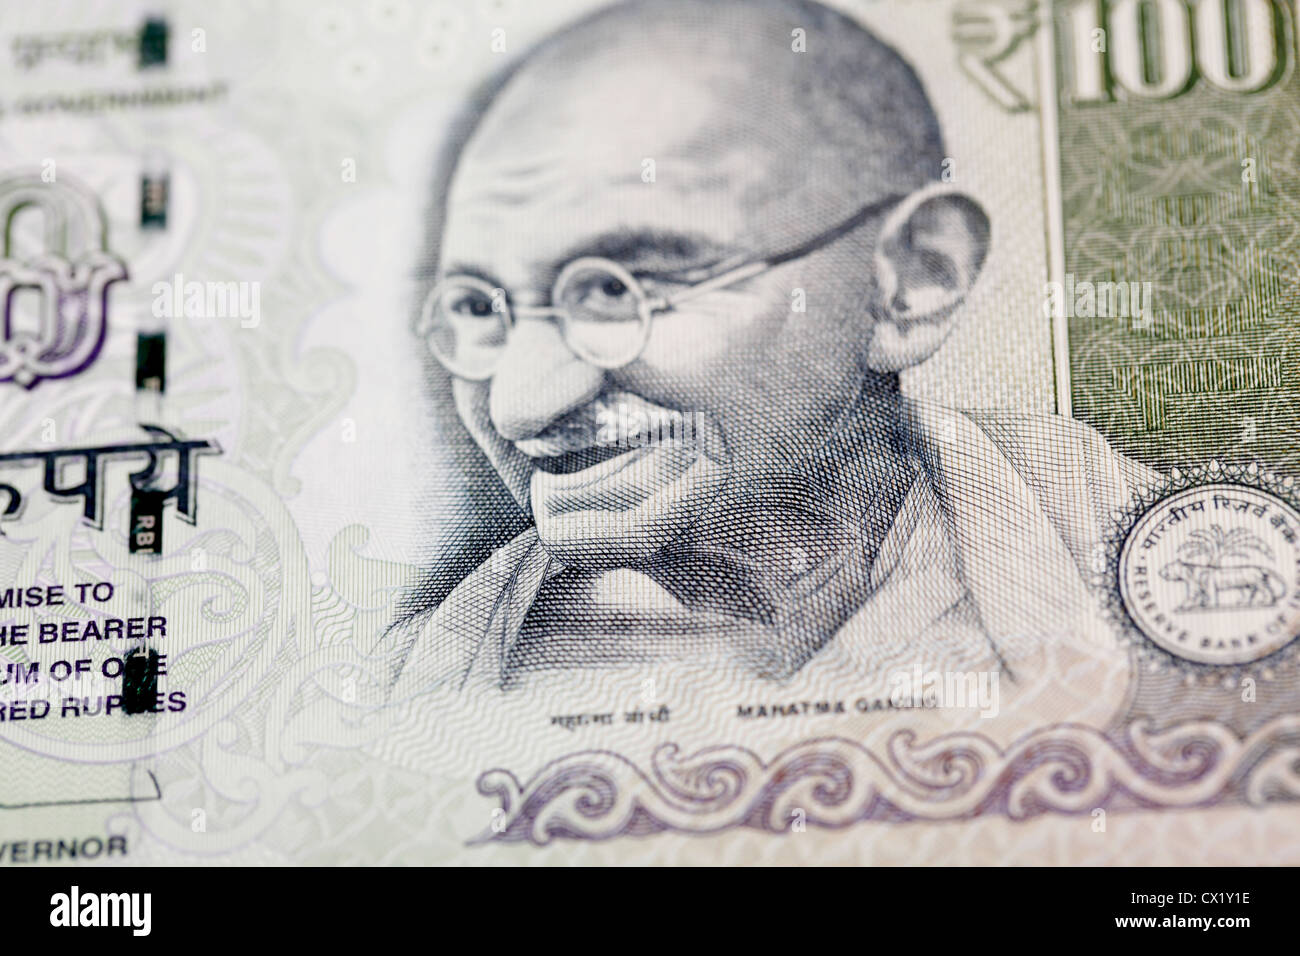 Gandhi on Indian hundred rupee note Stock Photo